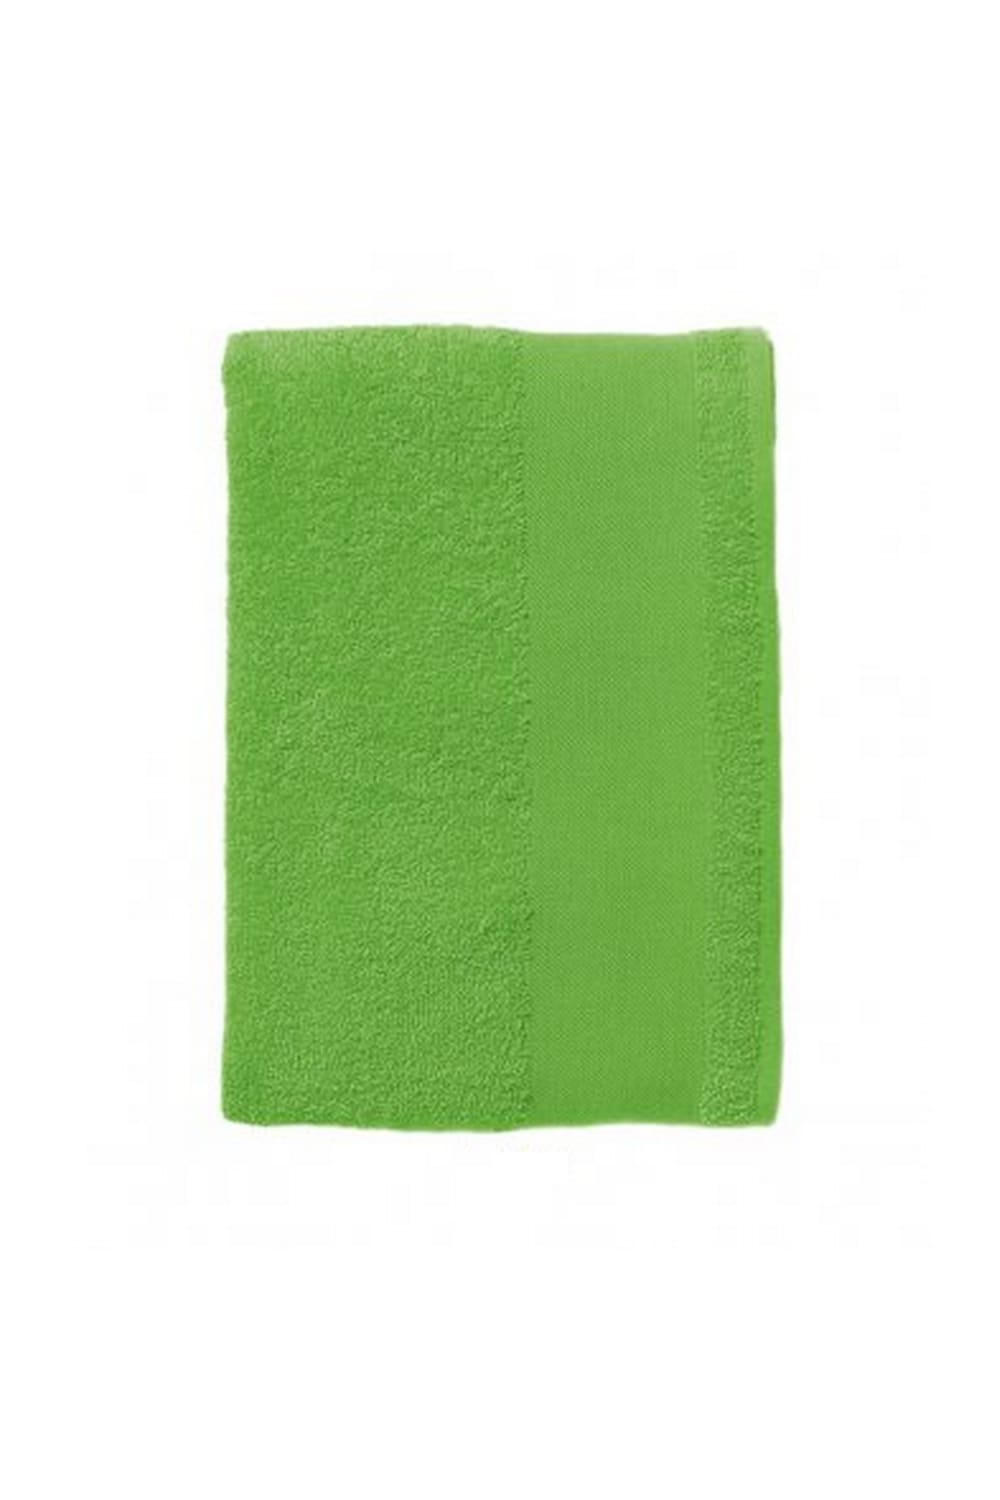 SOLS Island Bath Towel (30 X 56 inches) (Lime) (One Size)